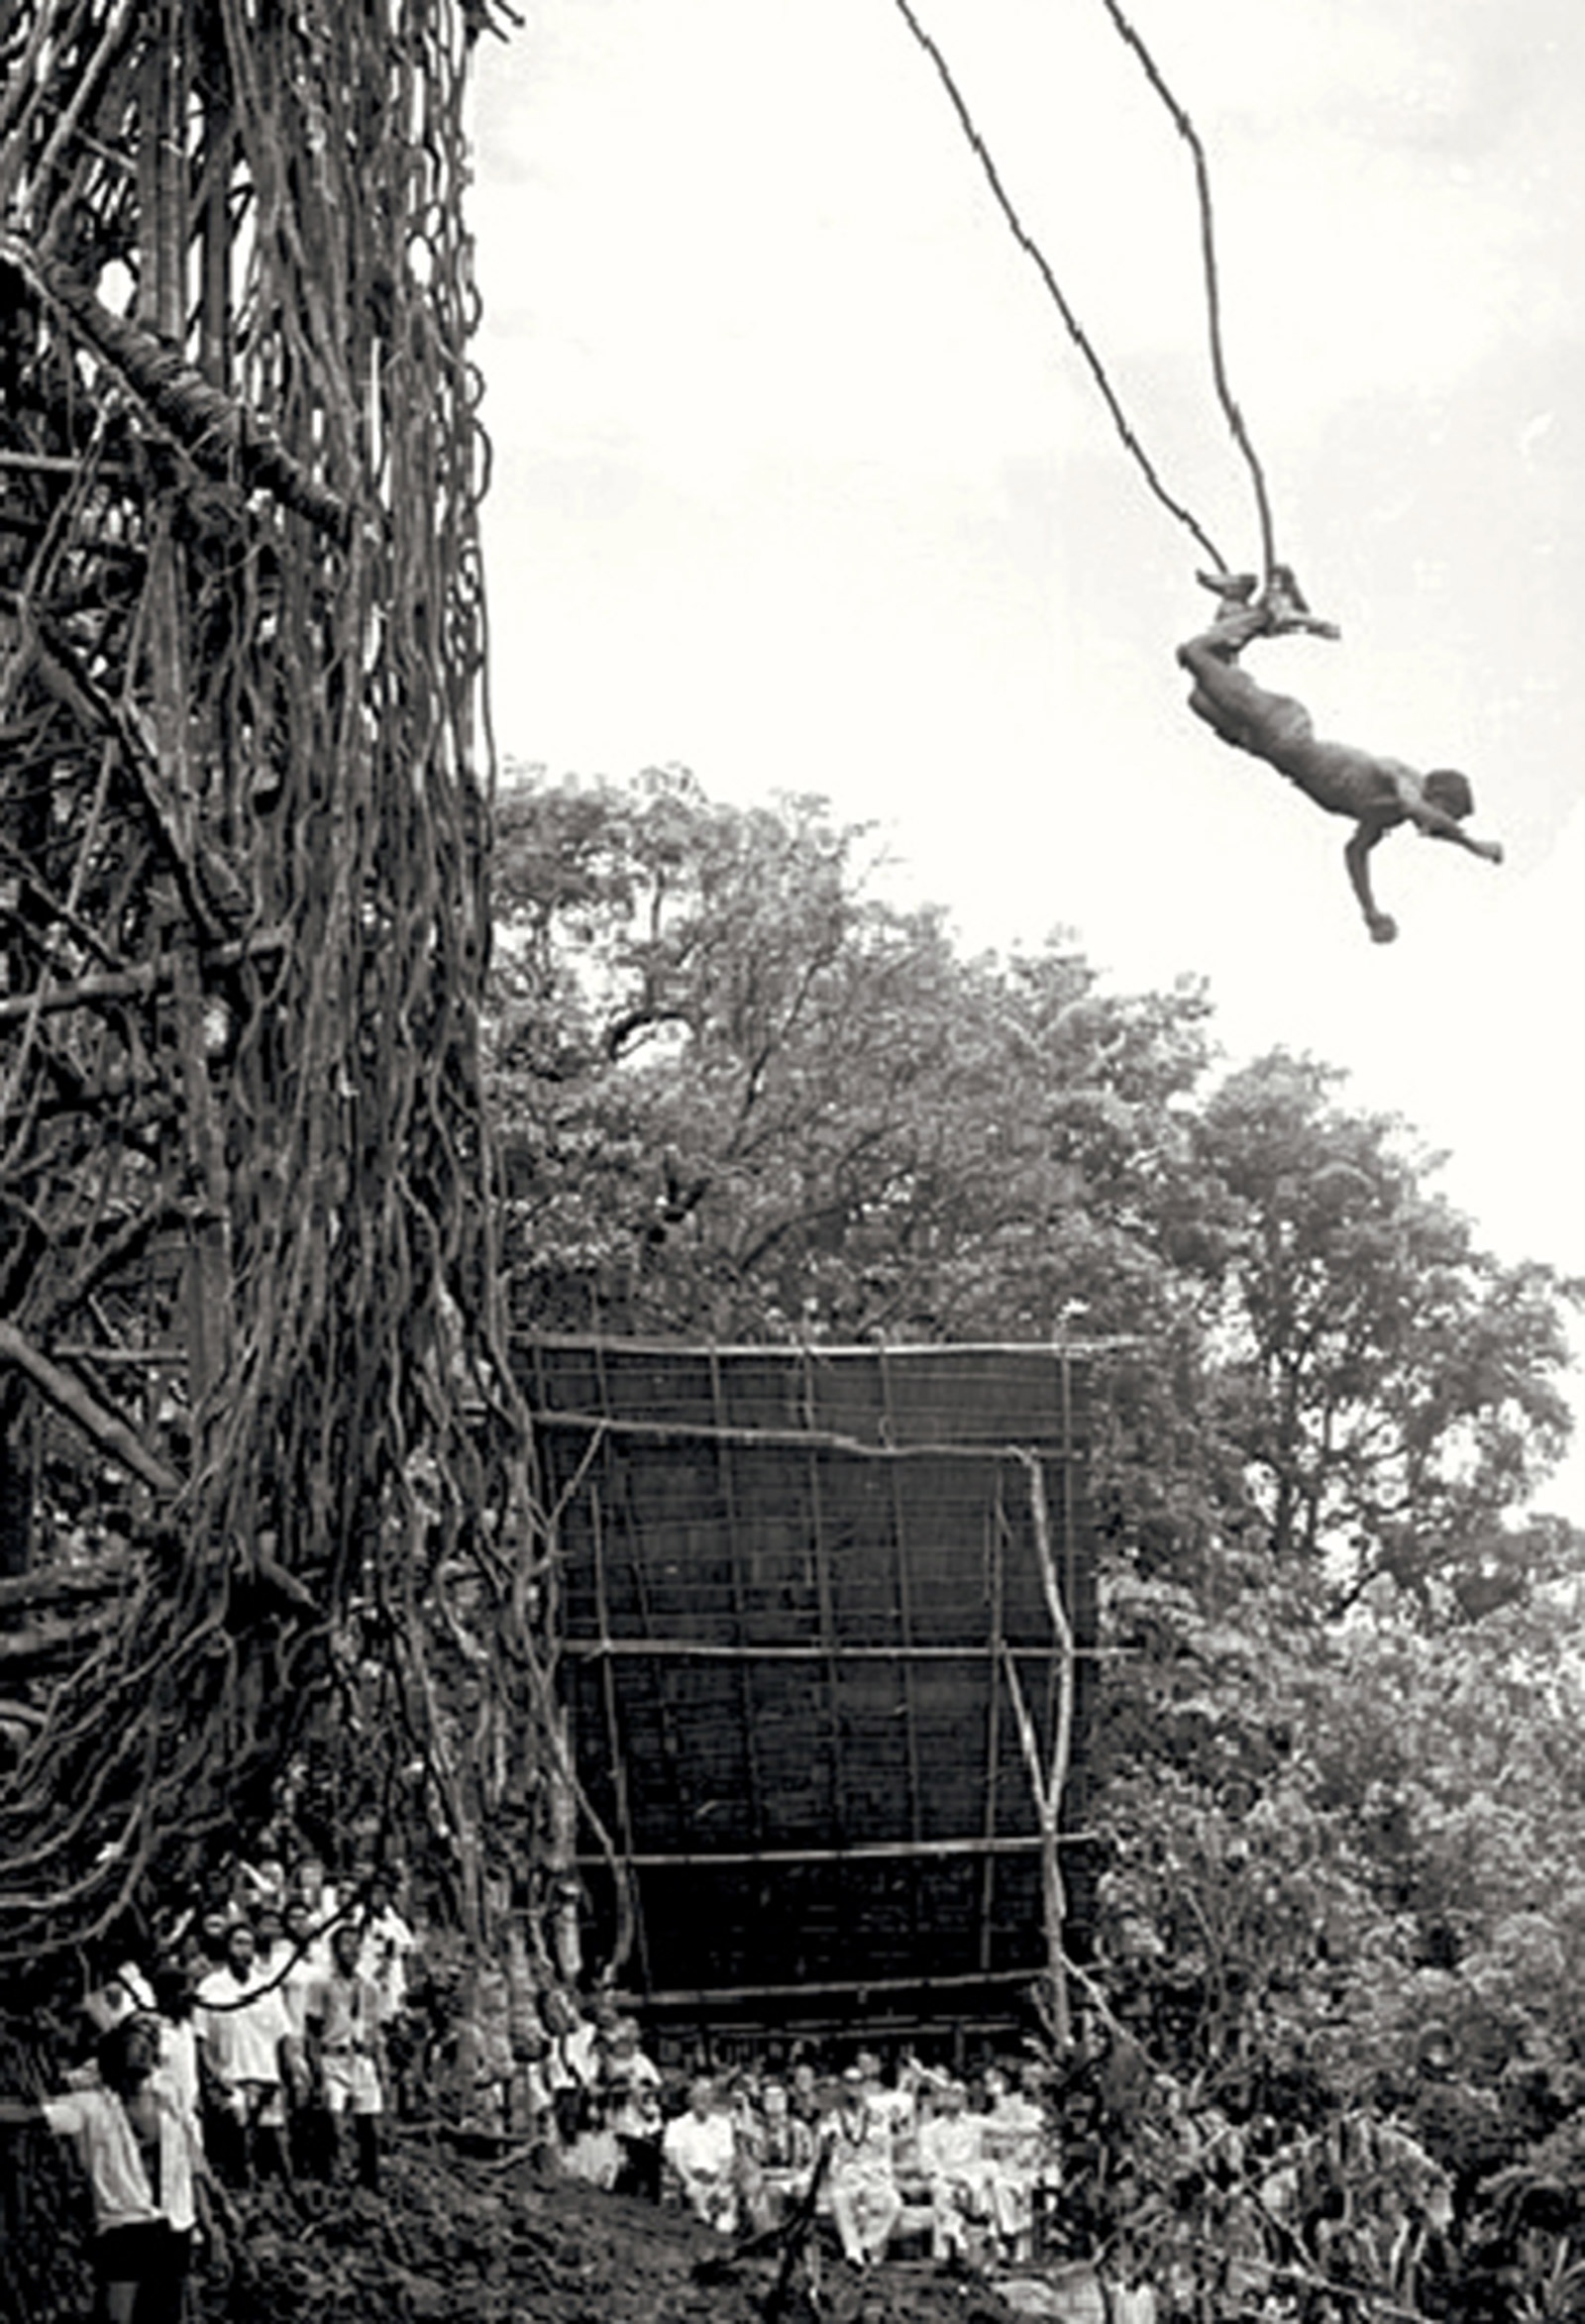 A photograph of a man on Pentecost Island in Vanuatu bungee jumping from a tower.